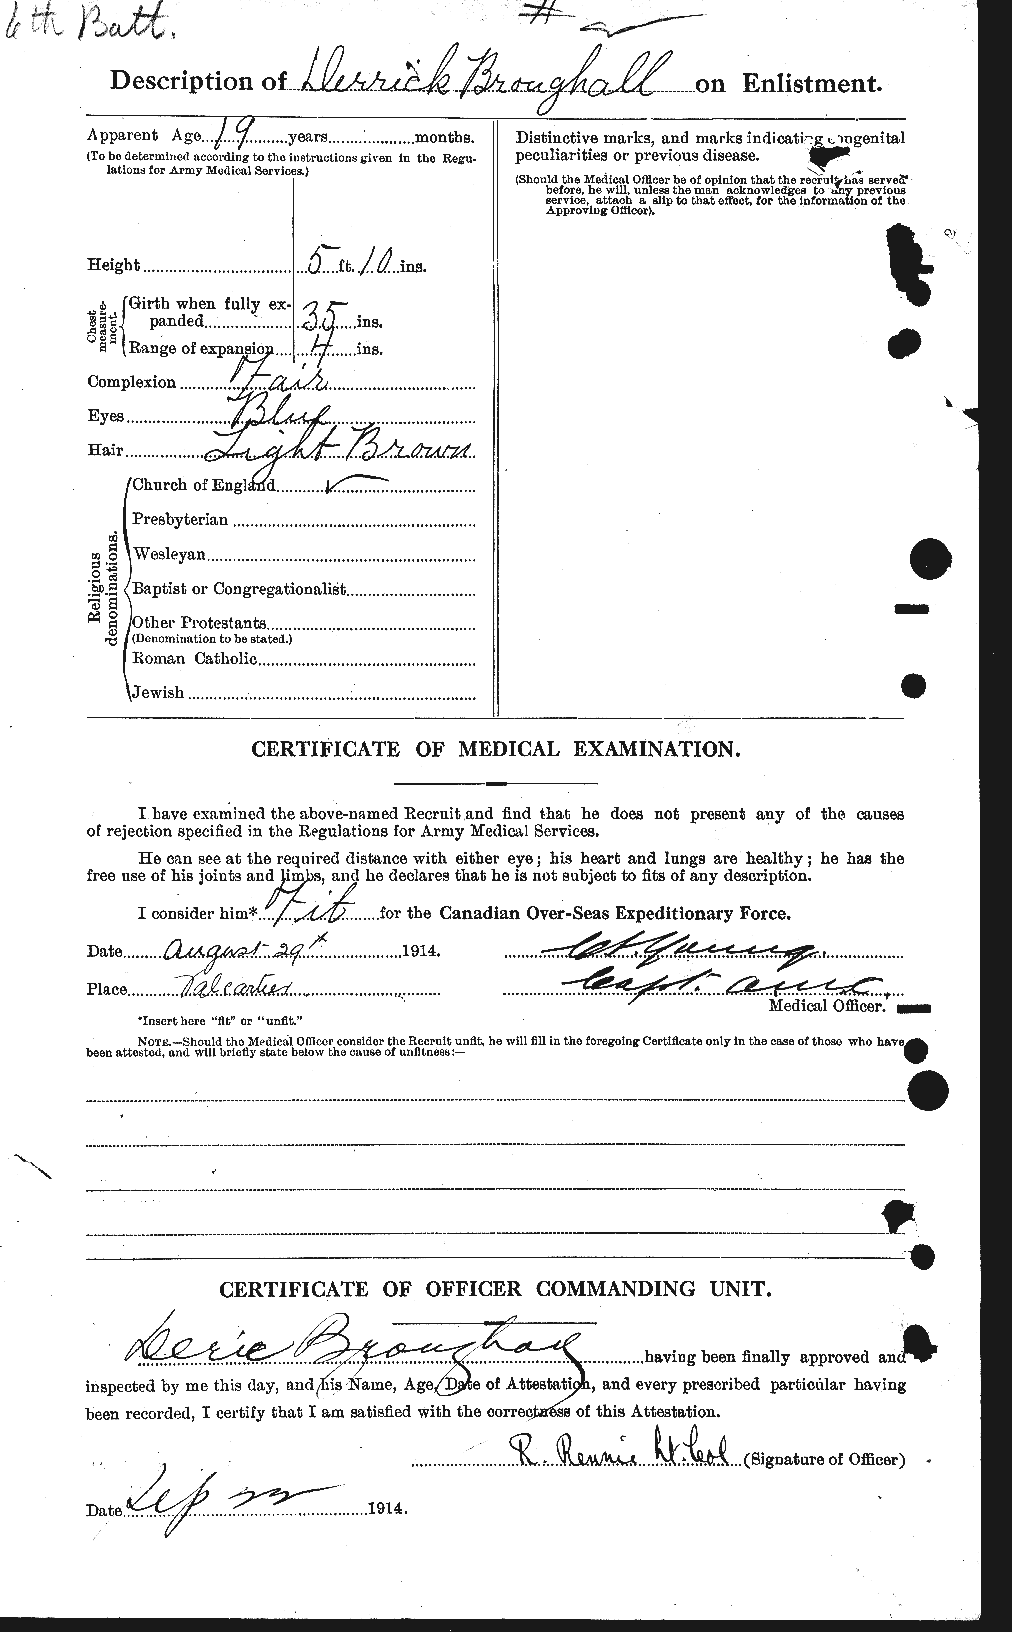 Personnel Records of the First World War - CEF 264498b